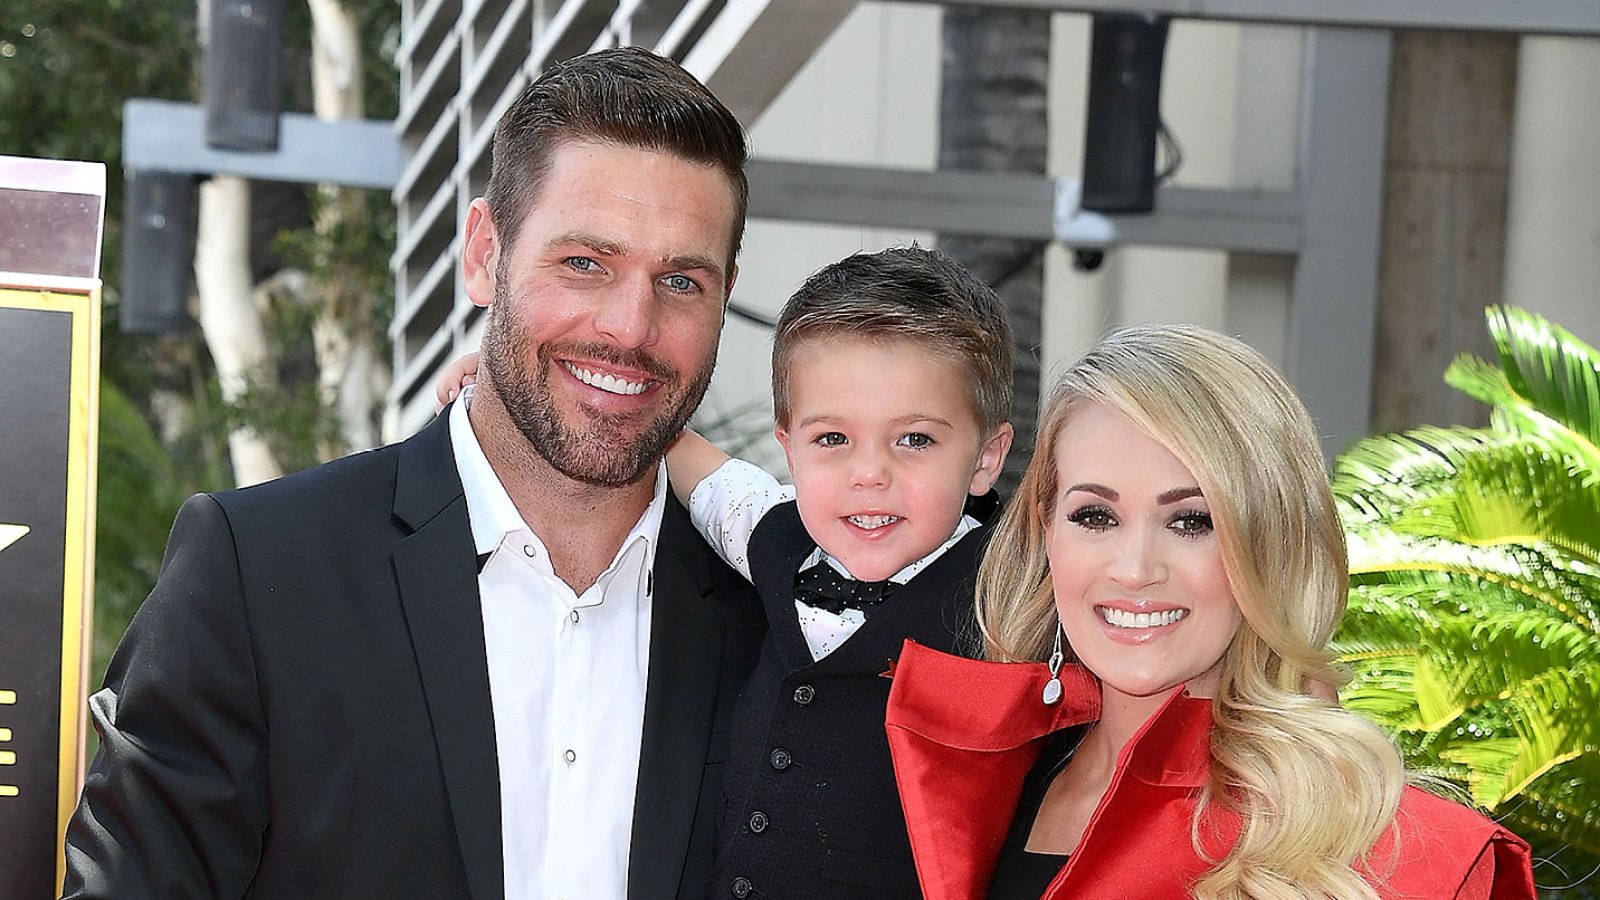 Carrie Underwood and Mike Fisher’s Son Isaiah, 4, Gets Caught Sneaking ‘Out of Bed to Spy’